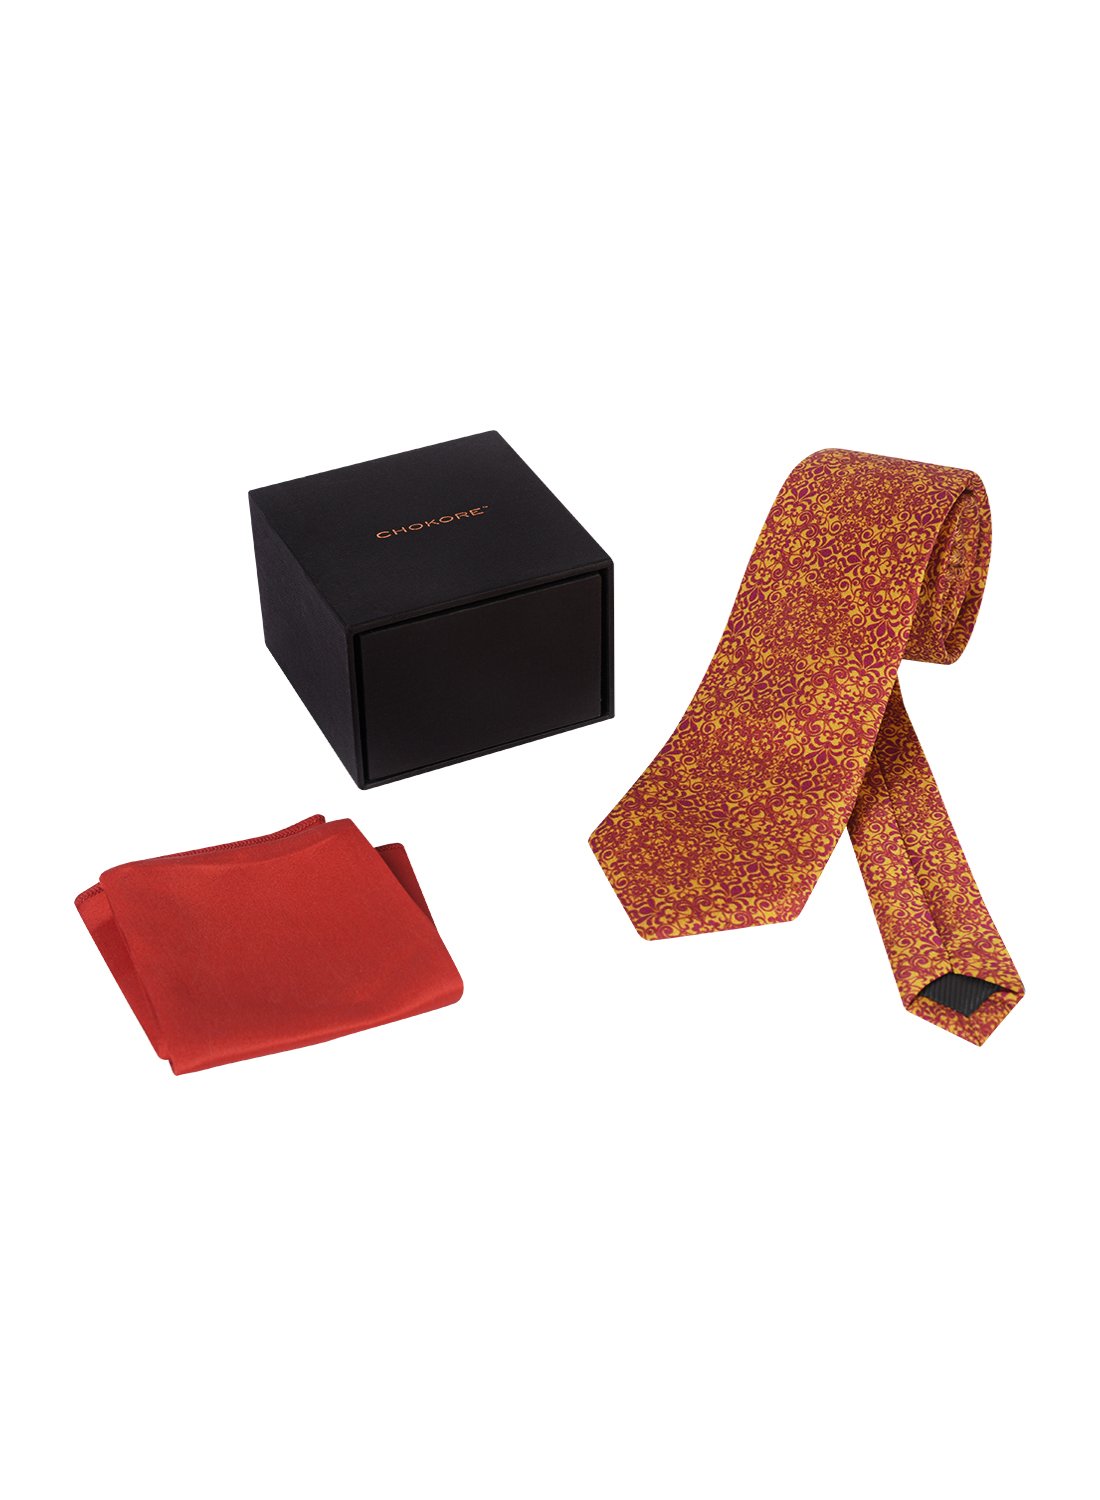 Chokore Red & Yellow Silk Tie - Indian At Heart range & Plain Red color Silk Pocket Square set